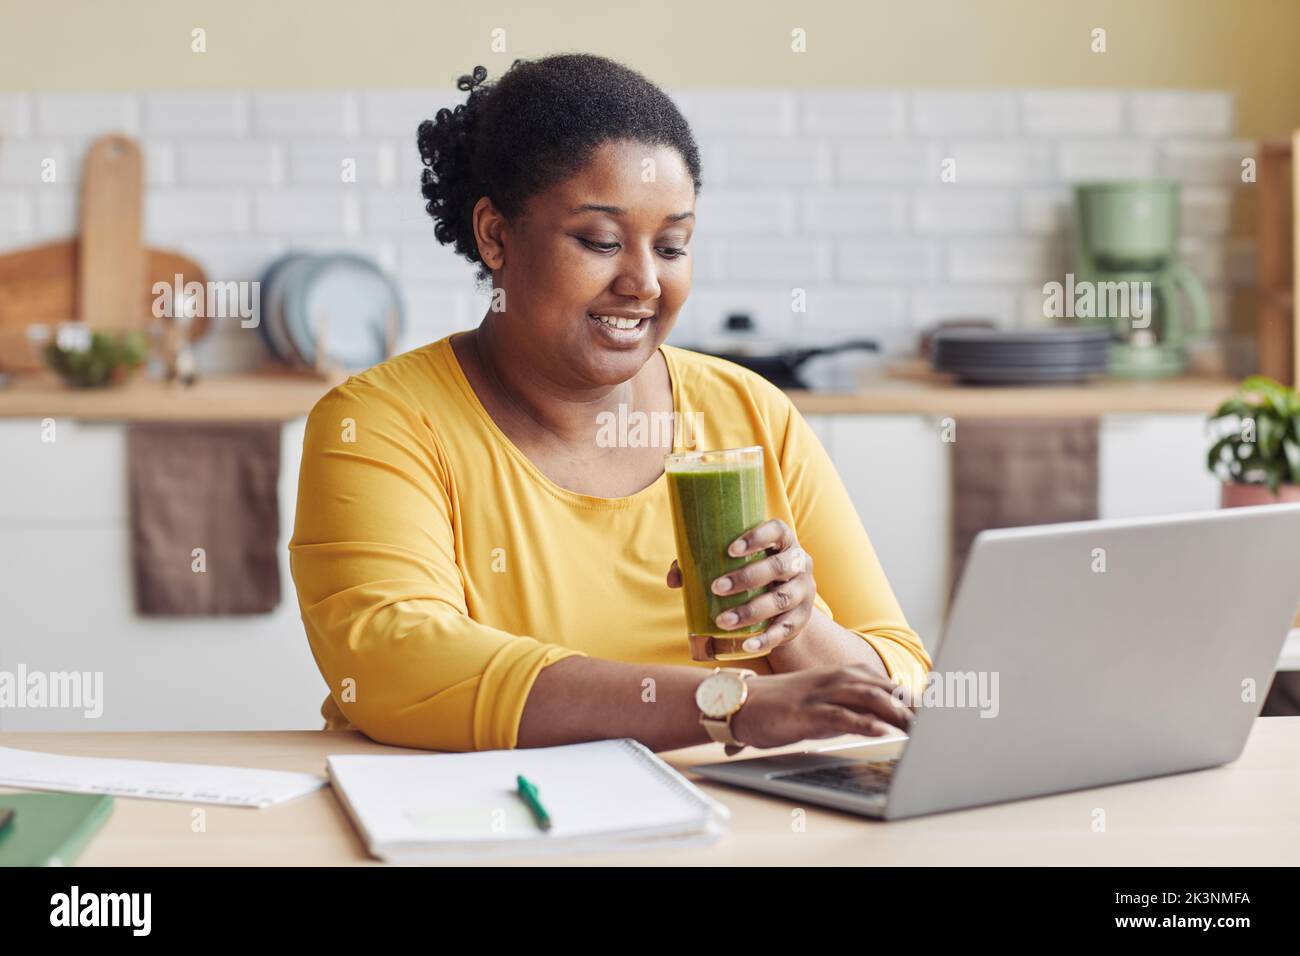 Portrait of smiling black woman drinking smoothie and using laptop at home Stock Photo